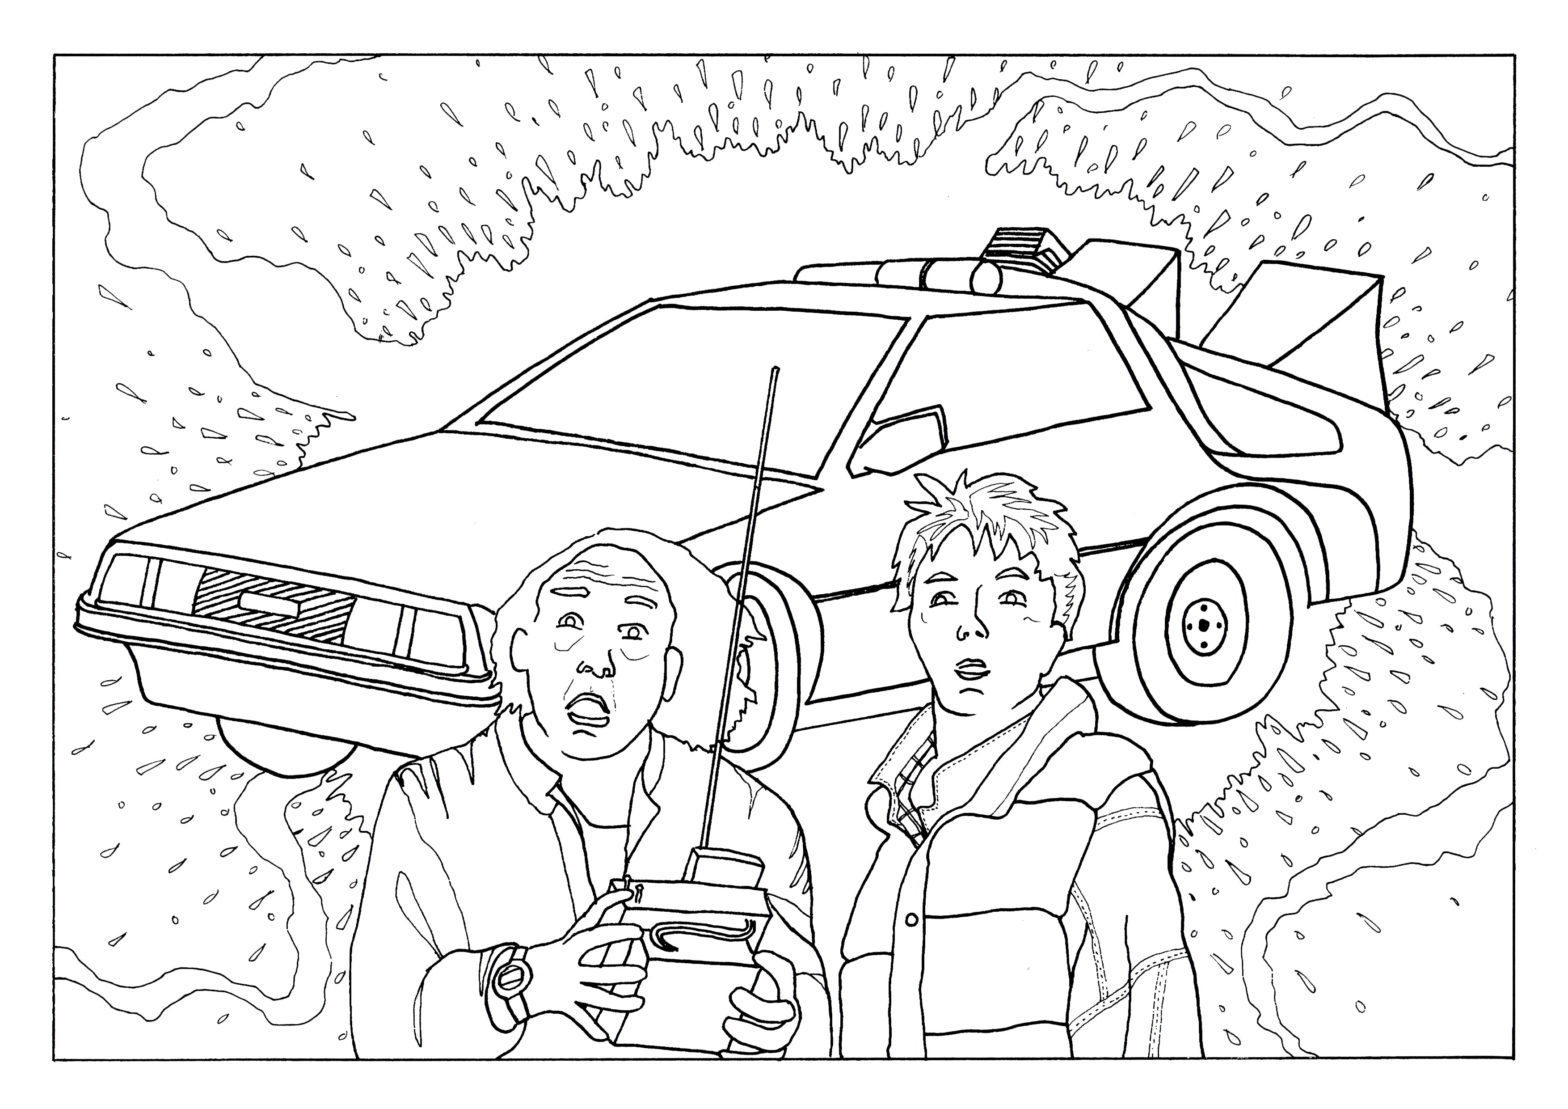 Colouring Pages Archives - Page 5 of 6 - Lorna Johnstone Art